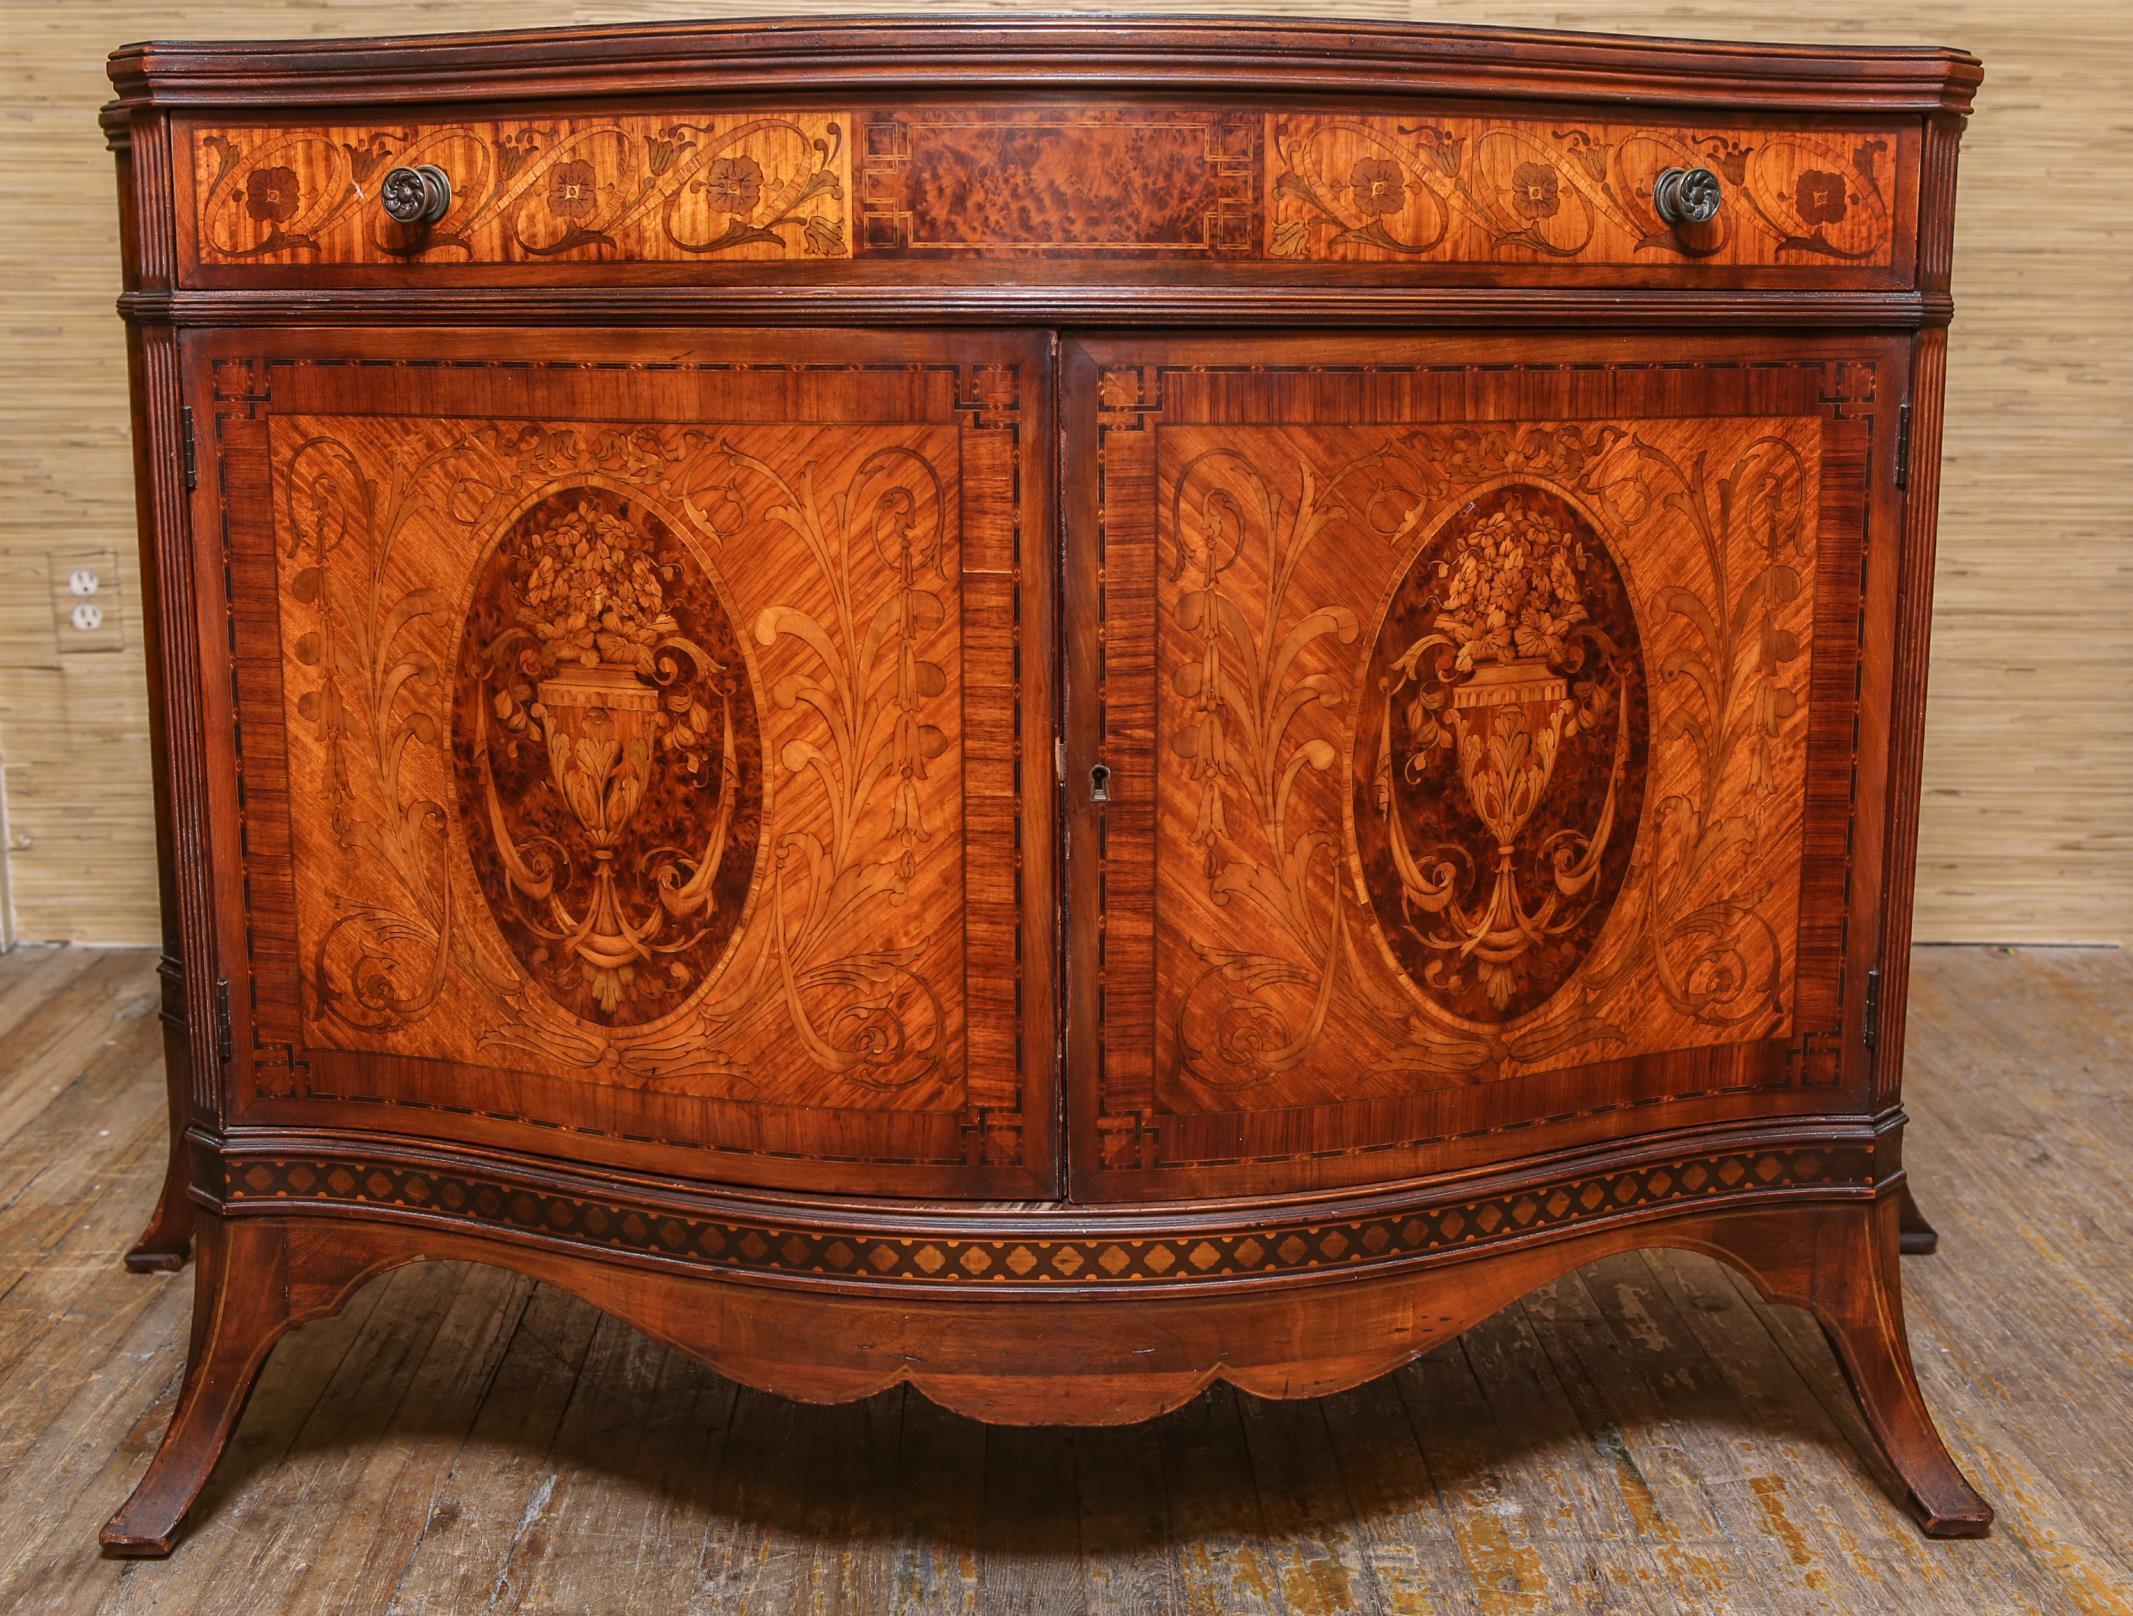 Italian neoclassical Revival manner serpentine-shaped commode or cabinet in mahogany with extensive fruit-wood marquetry. The central compartment doors with medallions contain three drawers with gilt pulls with turquoise embellishments. In good